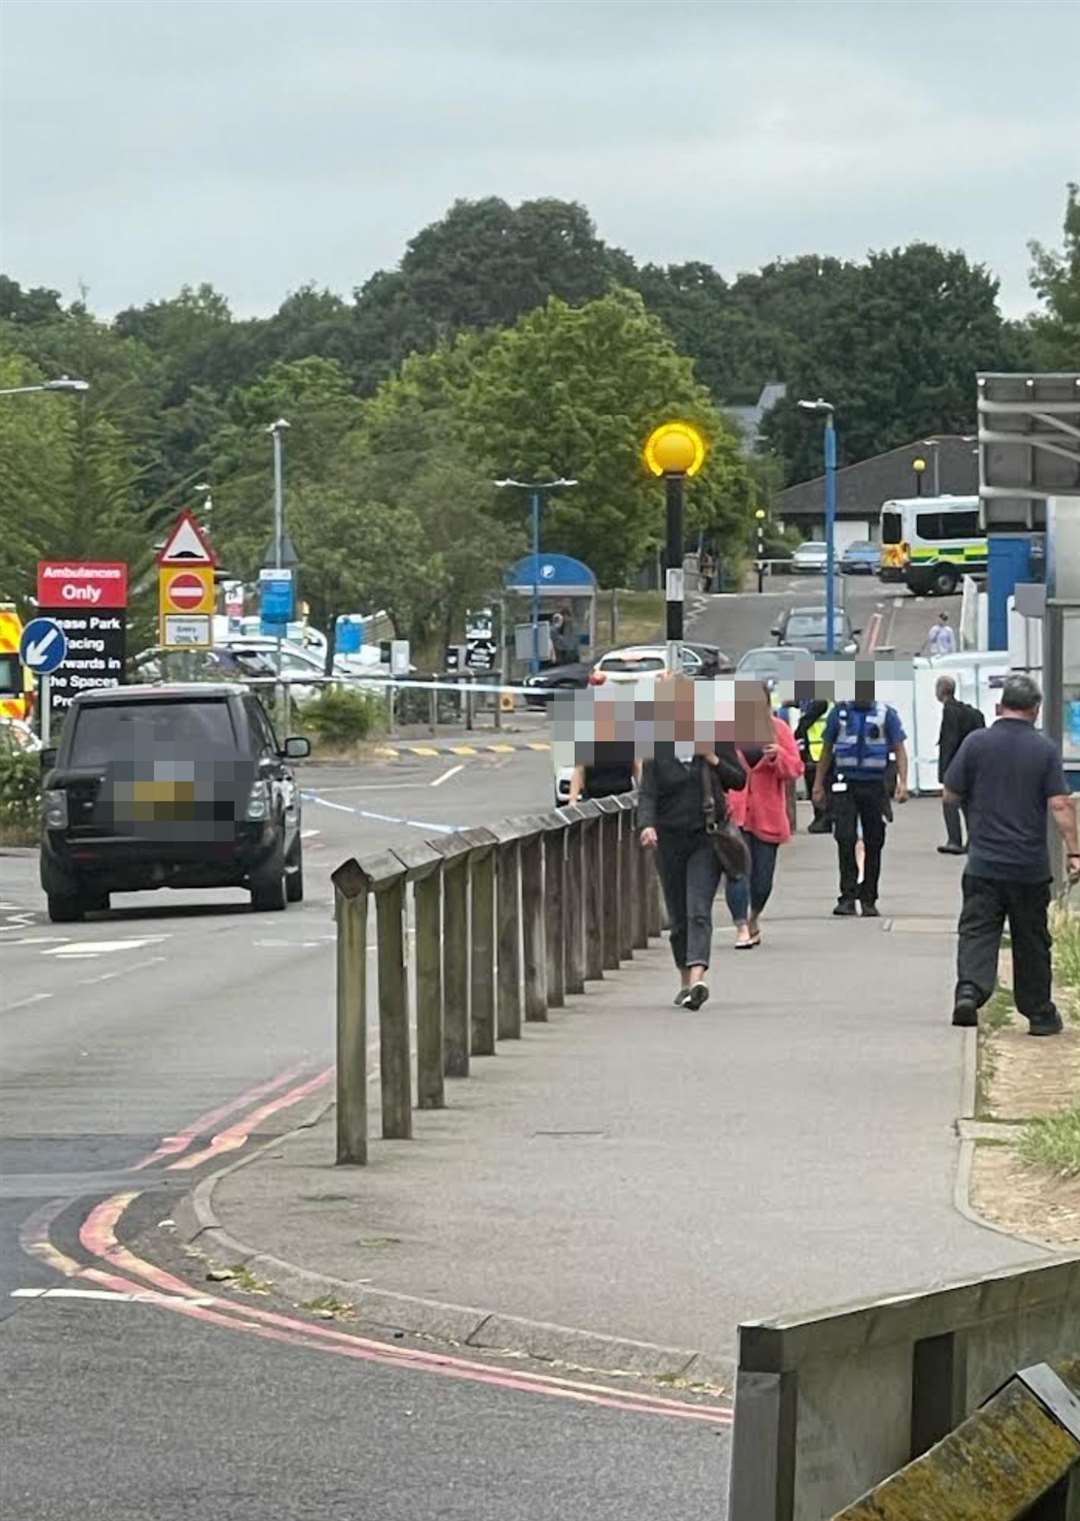 Security staff and police outside Maidstone hospital this morning. Photo: Ben Marshall